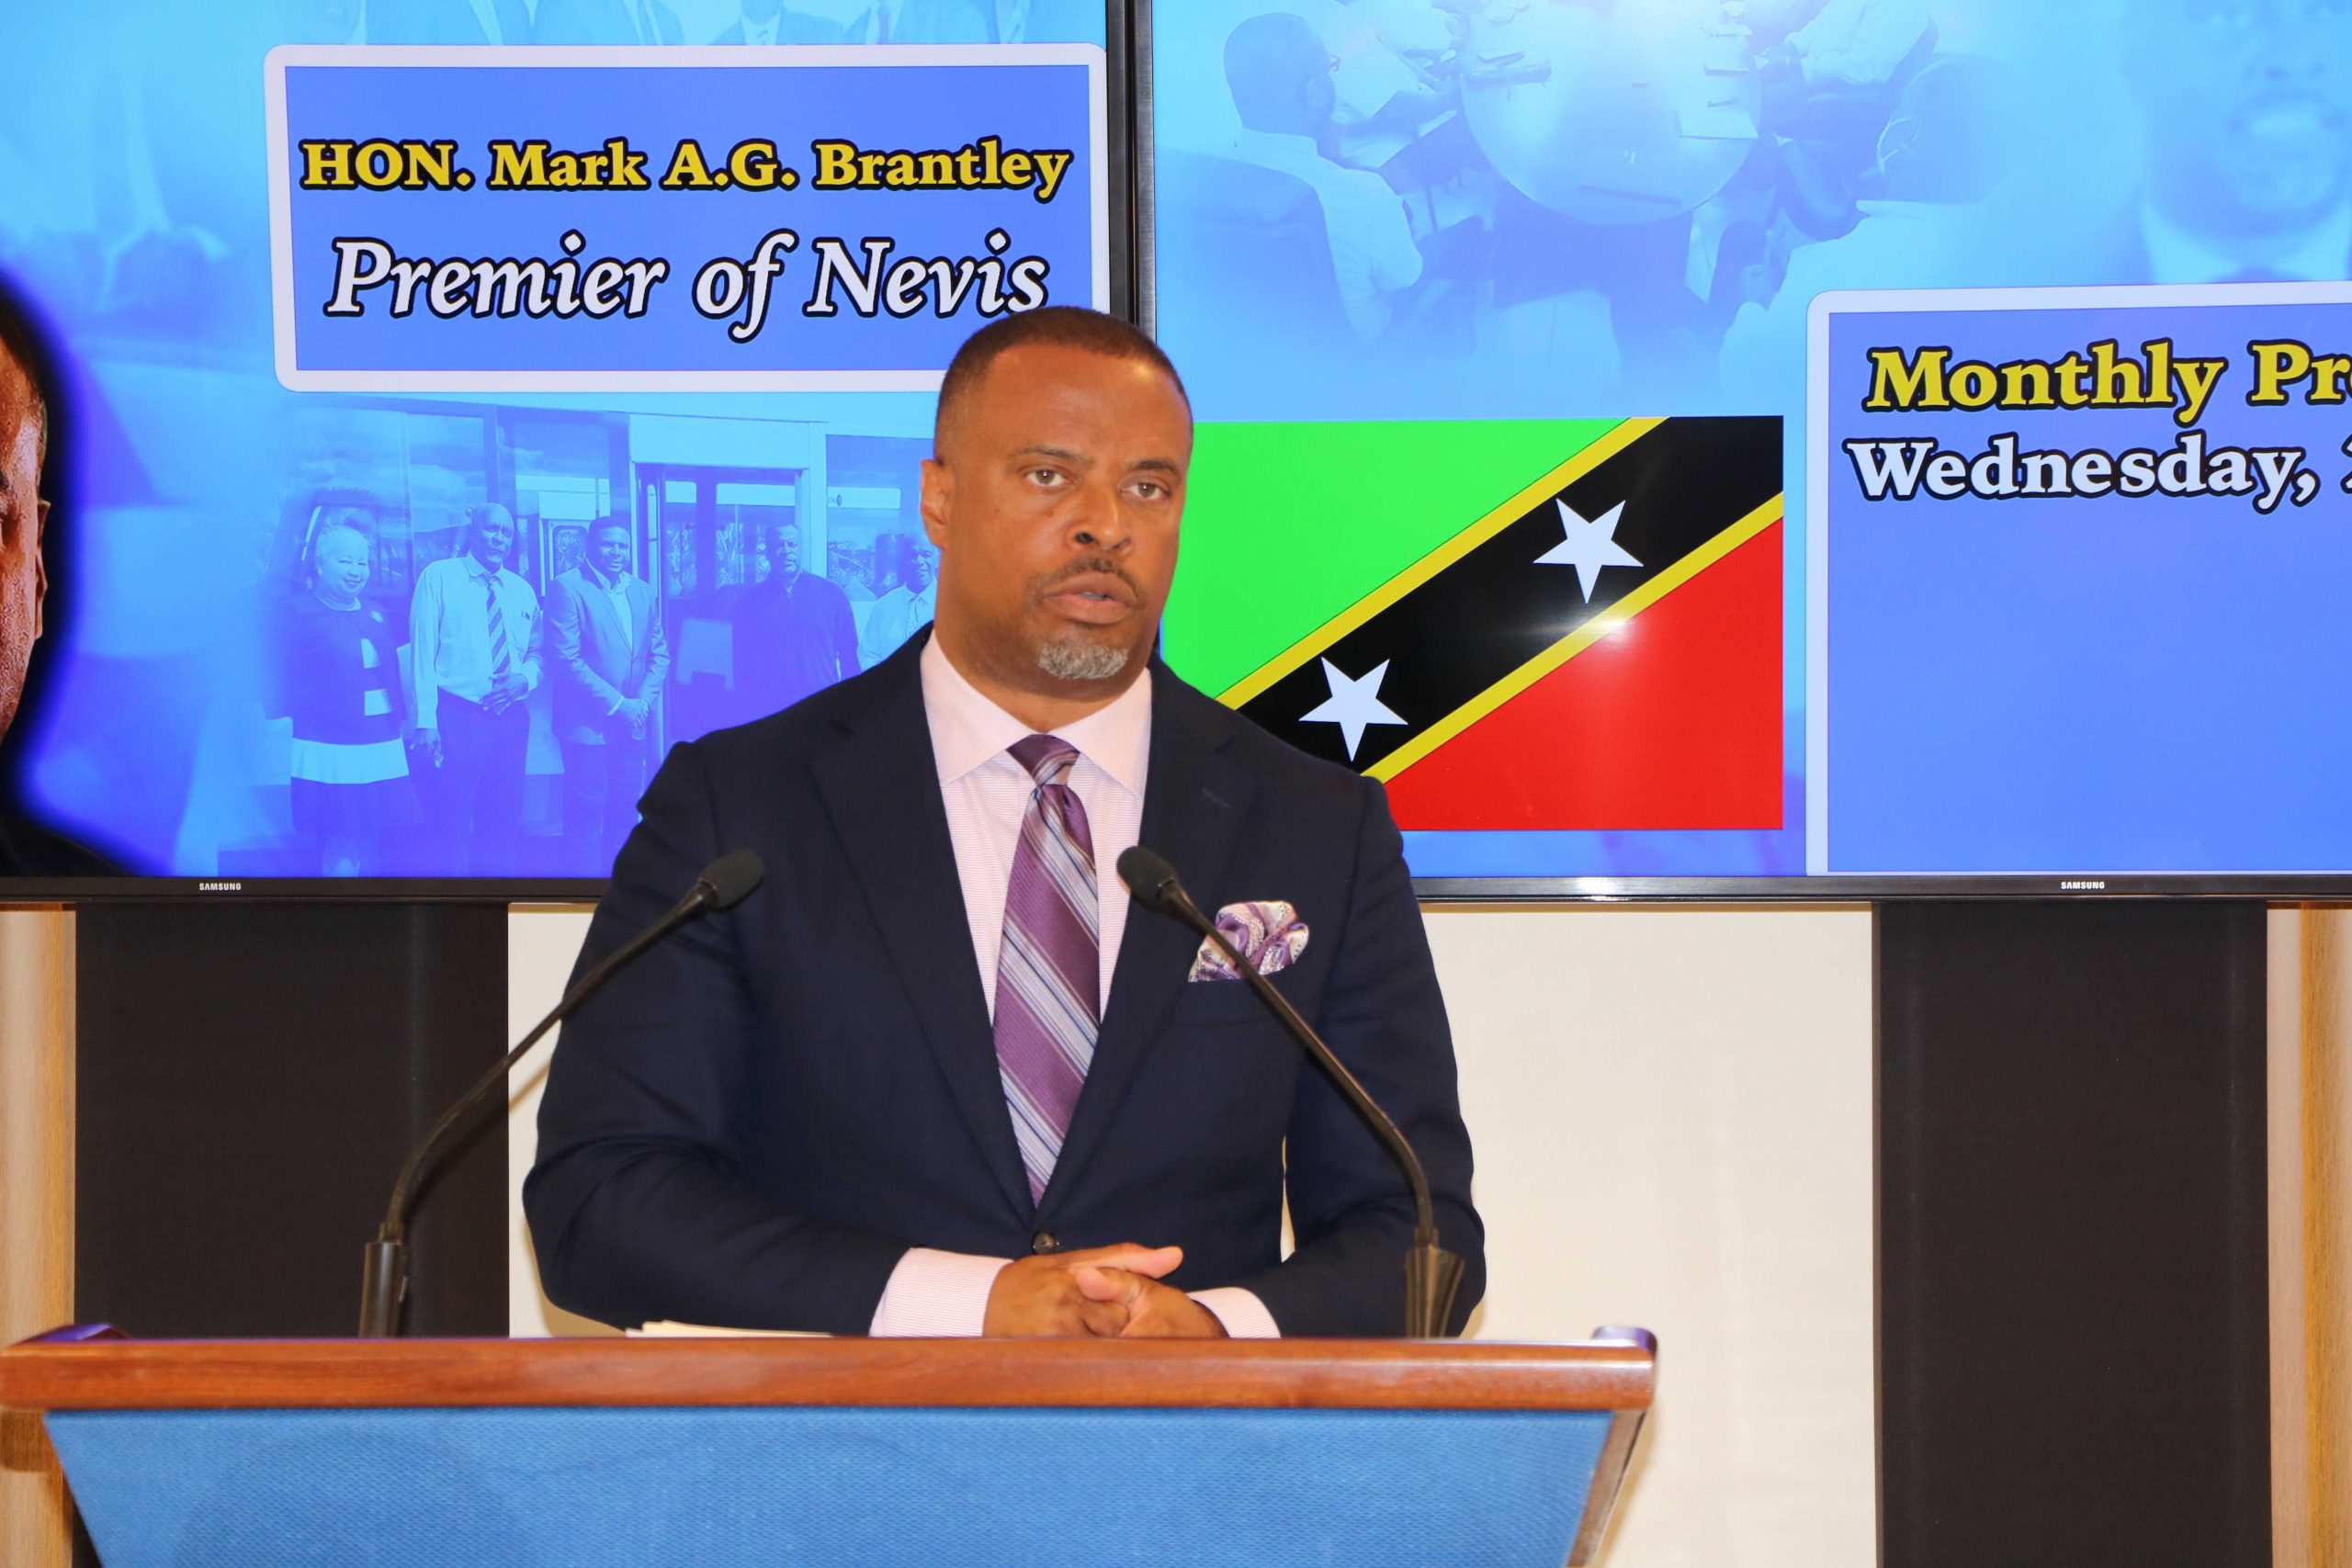 Hon. Mark Brantley, Premier of Nevis at his April 2021 press conference in Cabinet Room at Pinney’s Estate